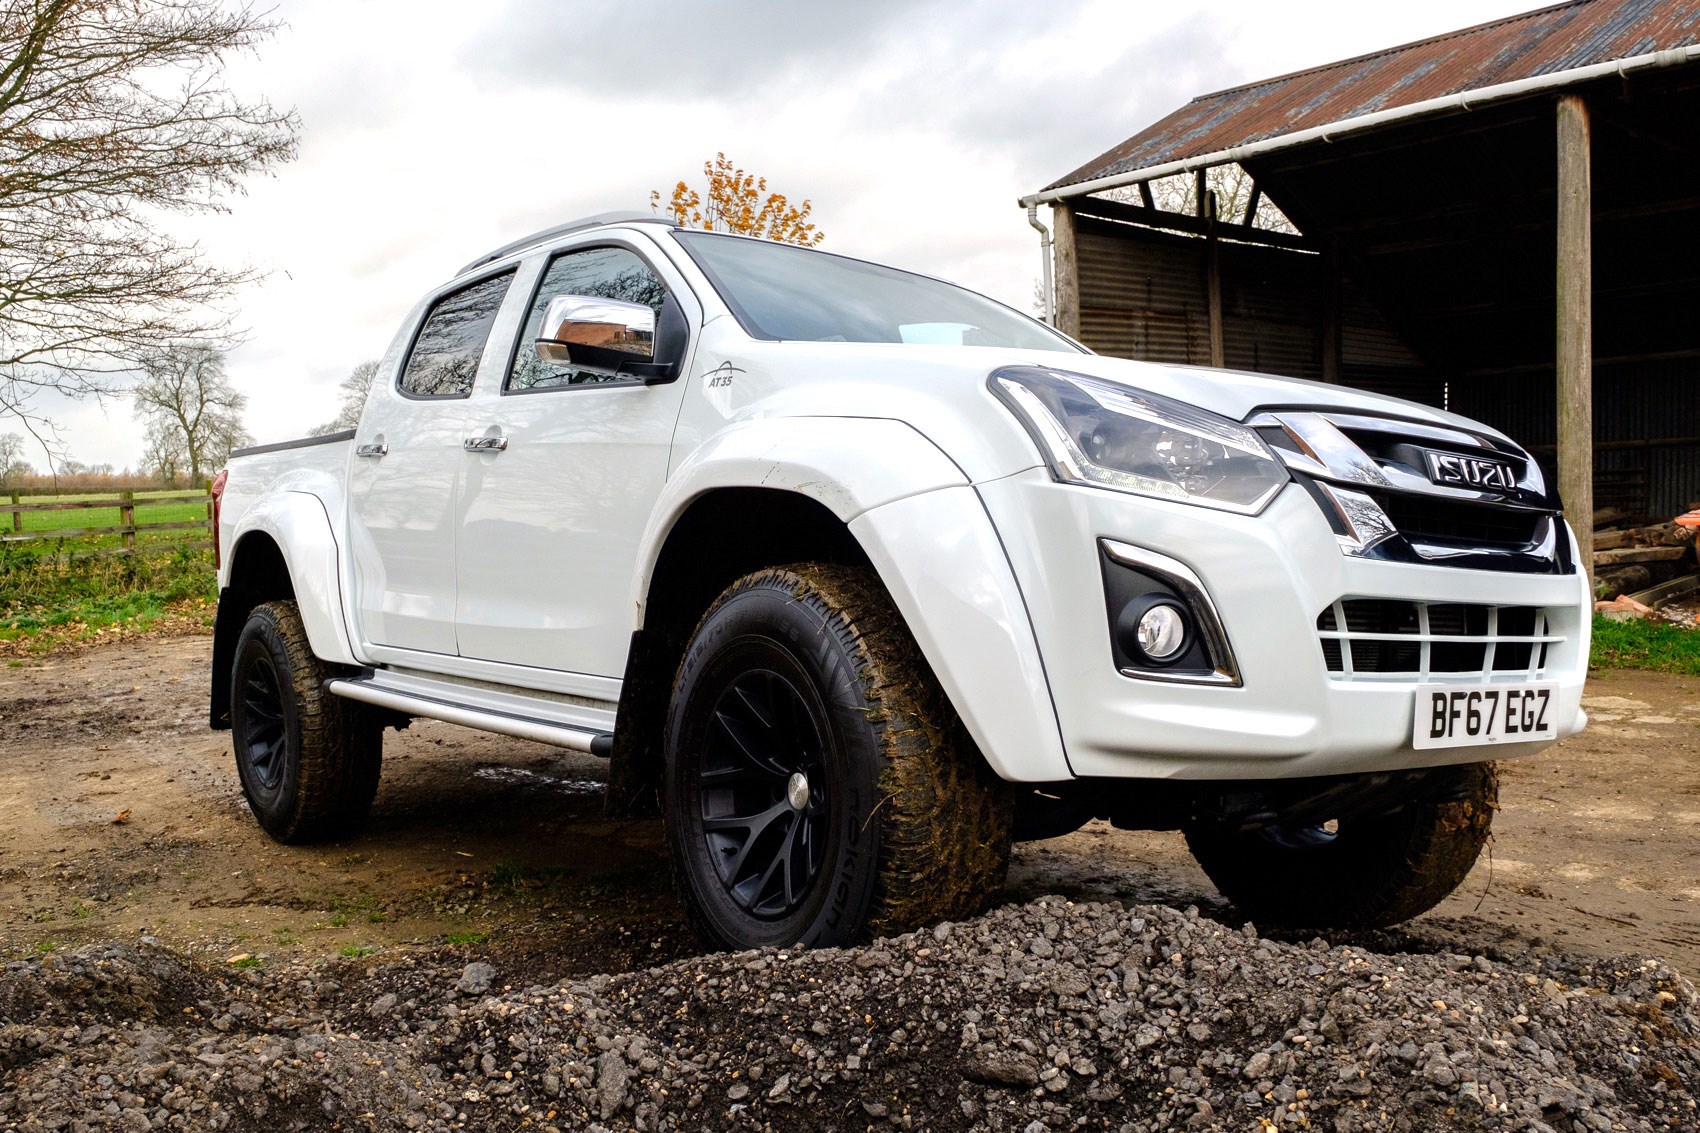 Isuzu D-Max AT35 1.9 review - front view, wheel up